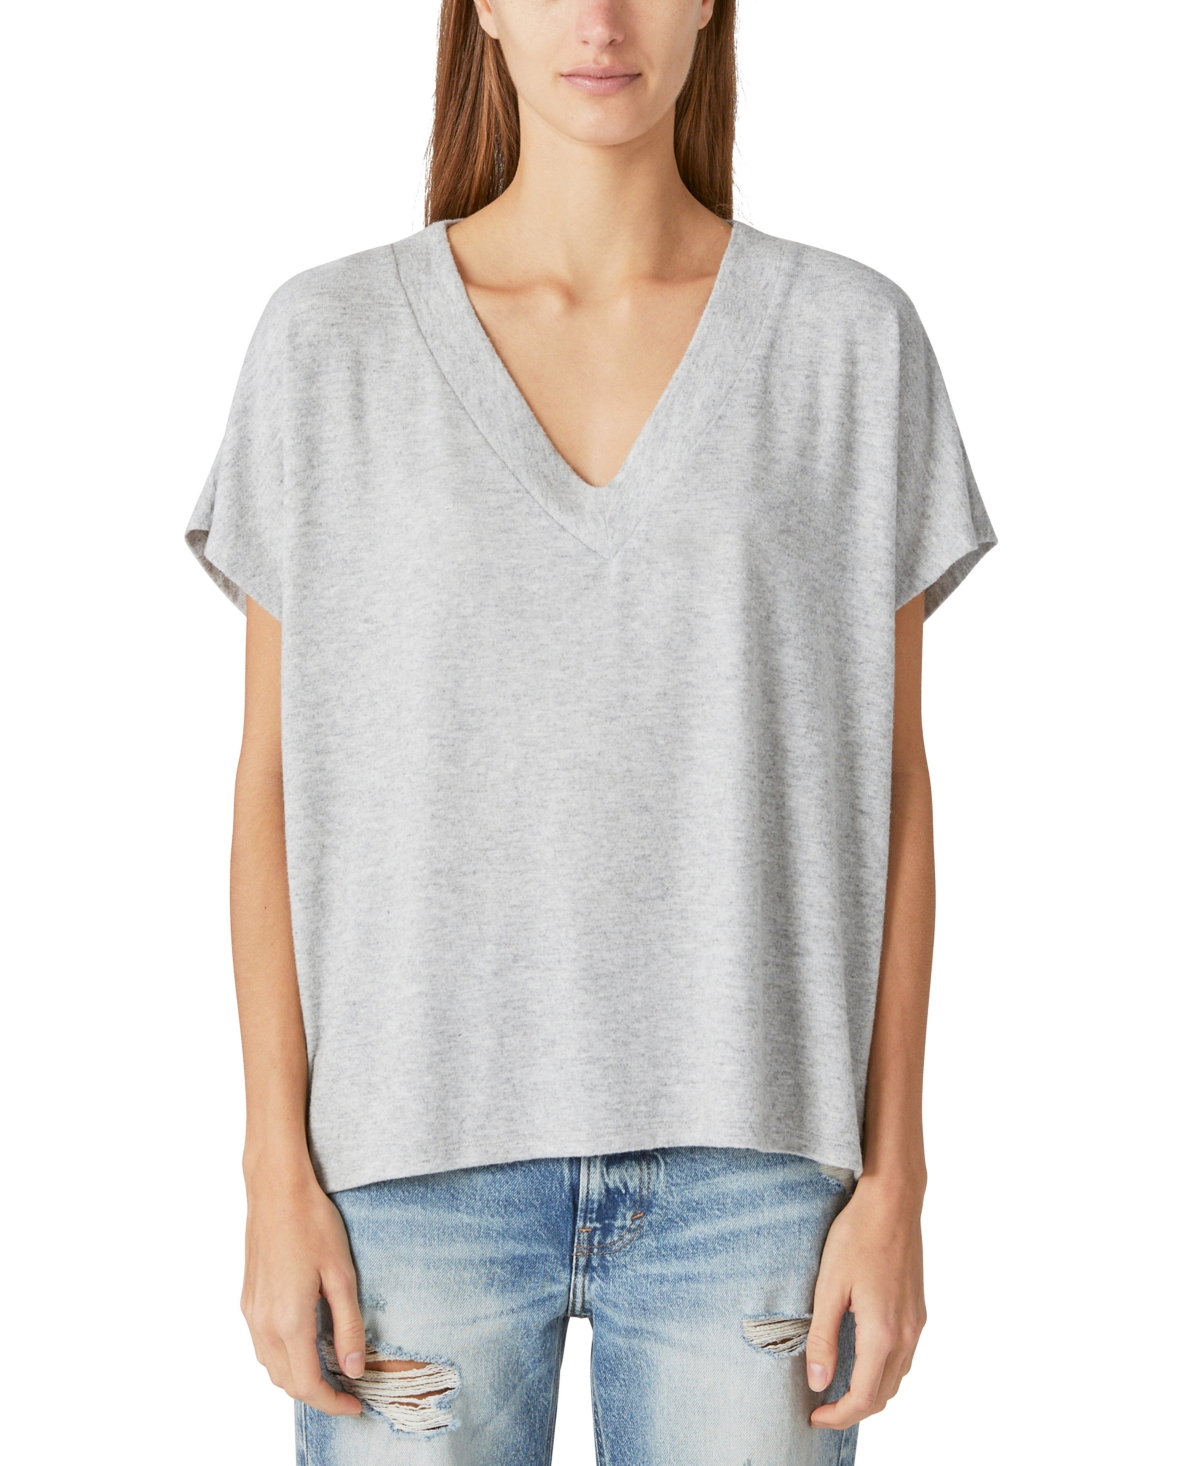 Lucky Brand Cotton Bowie-Graphic T-Shirt - Macy's